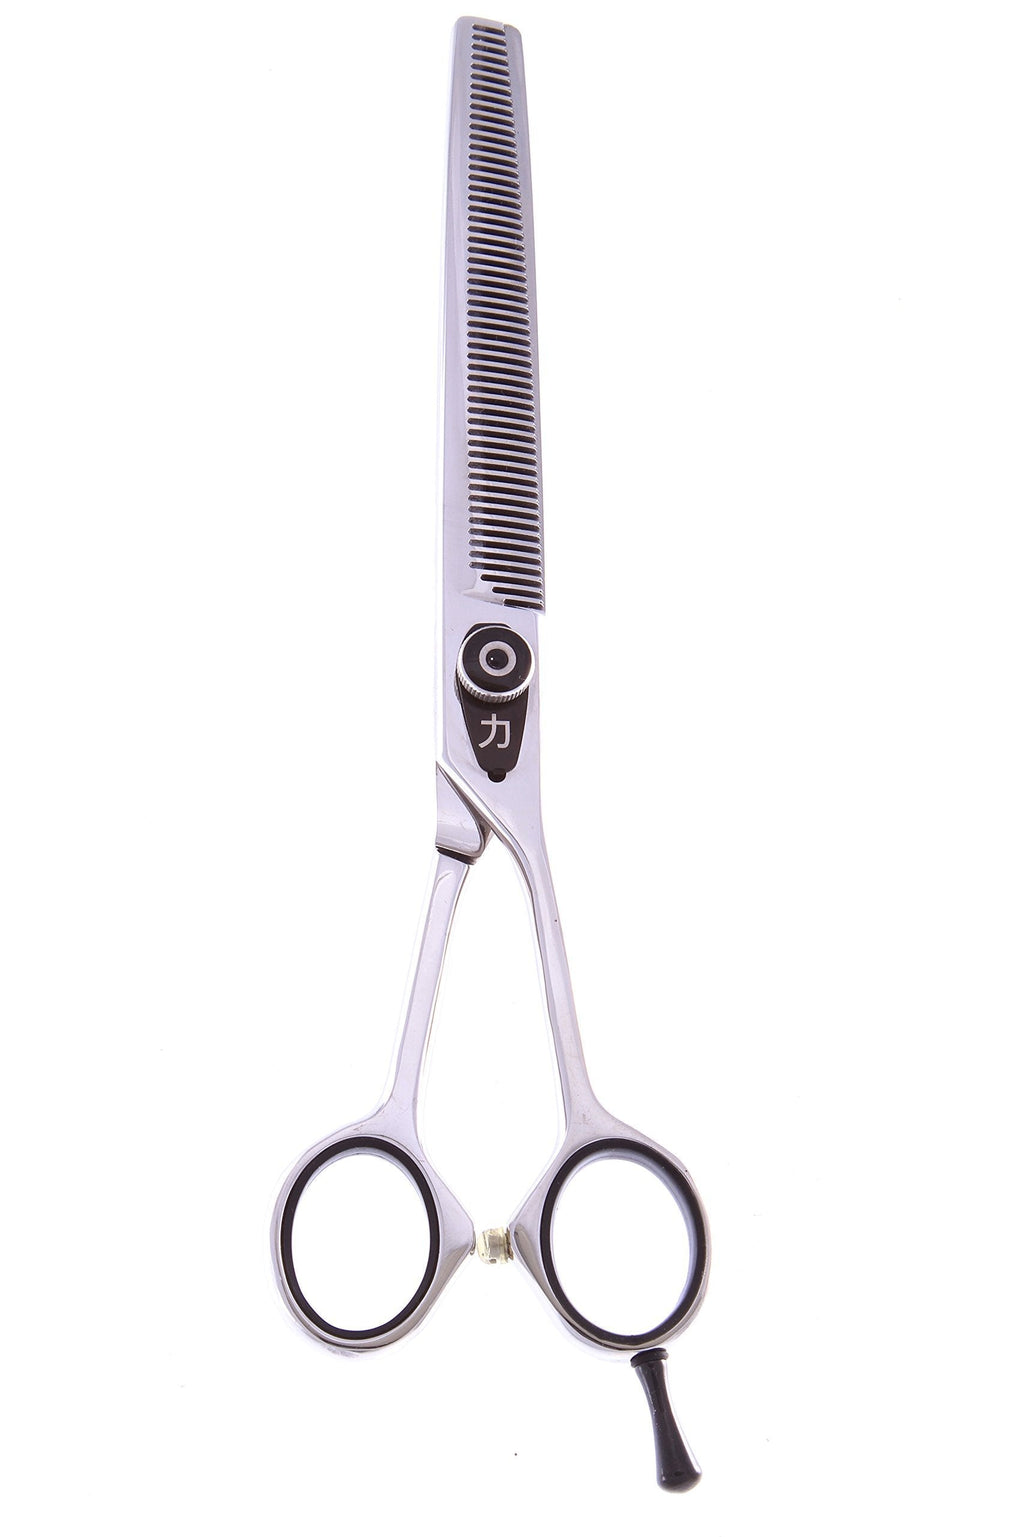 [Australia] - ShearsDirect 50 Tooth Blender Shear with an Opposing Handle Design, 7-Inch 